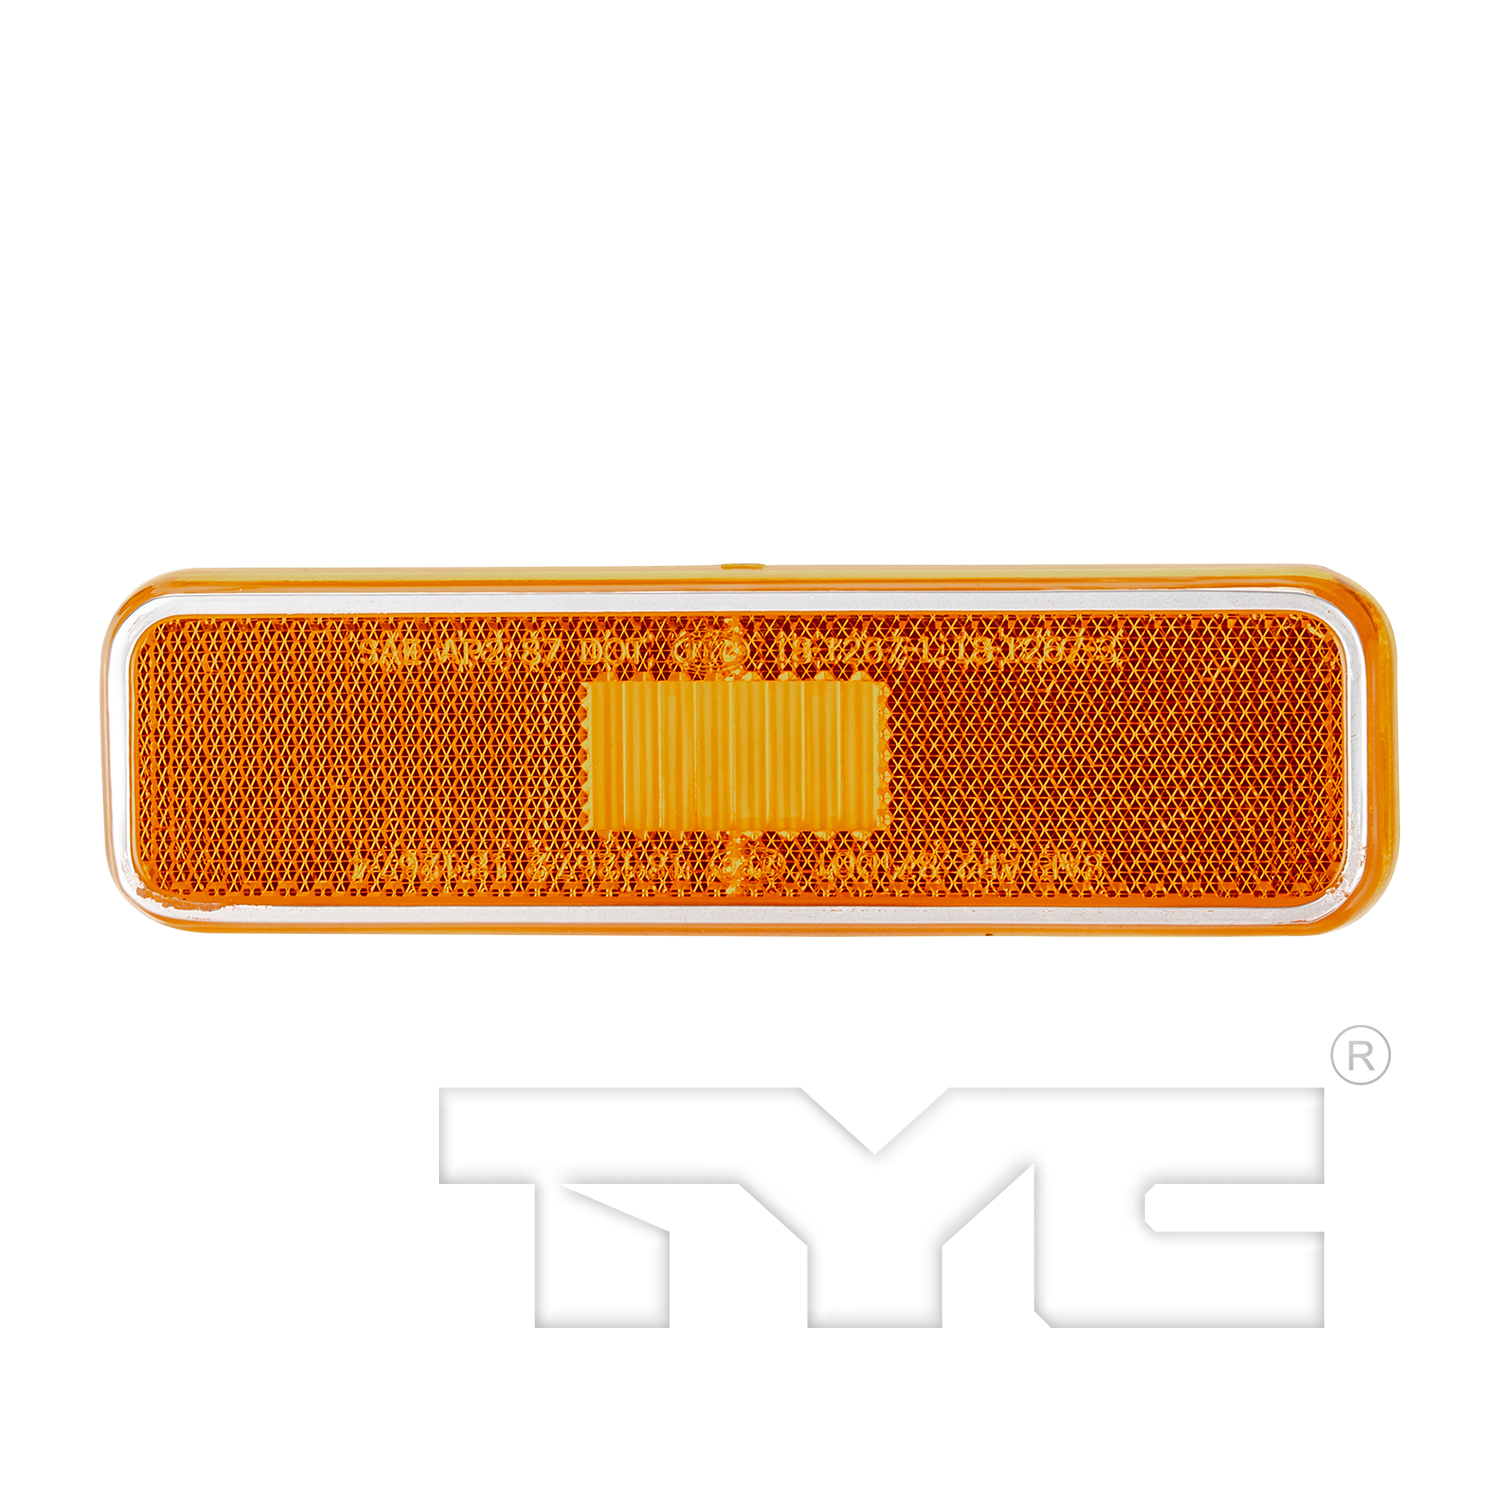 Aftermarket LAMPS for DODGE - W100, W100,84-89,LT Front marker lamp assy